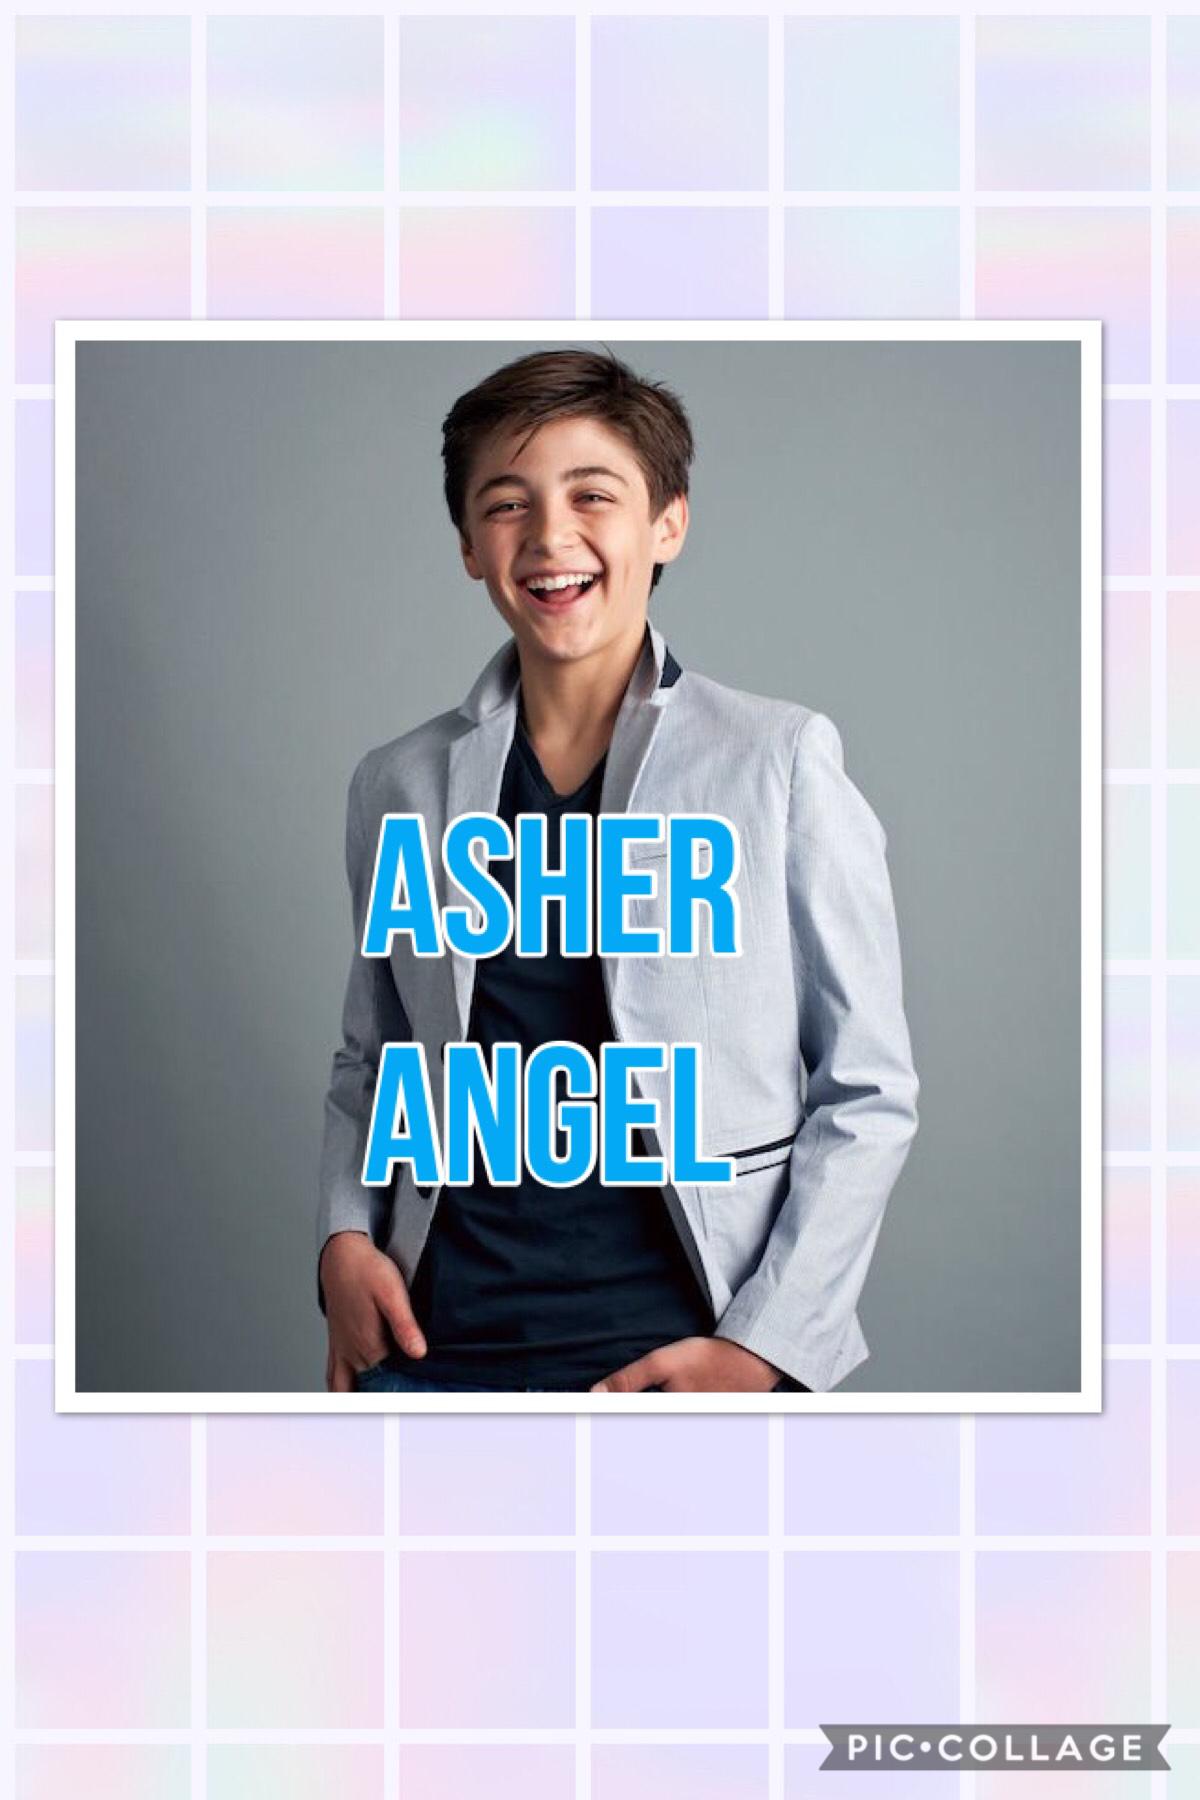 Asher Angel.... Follow and like if you know him